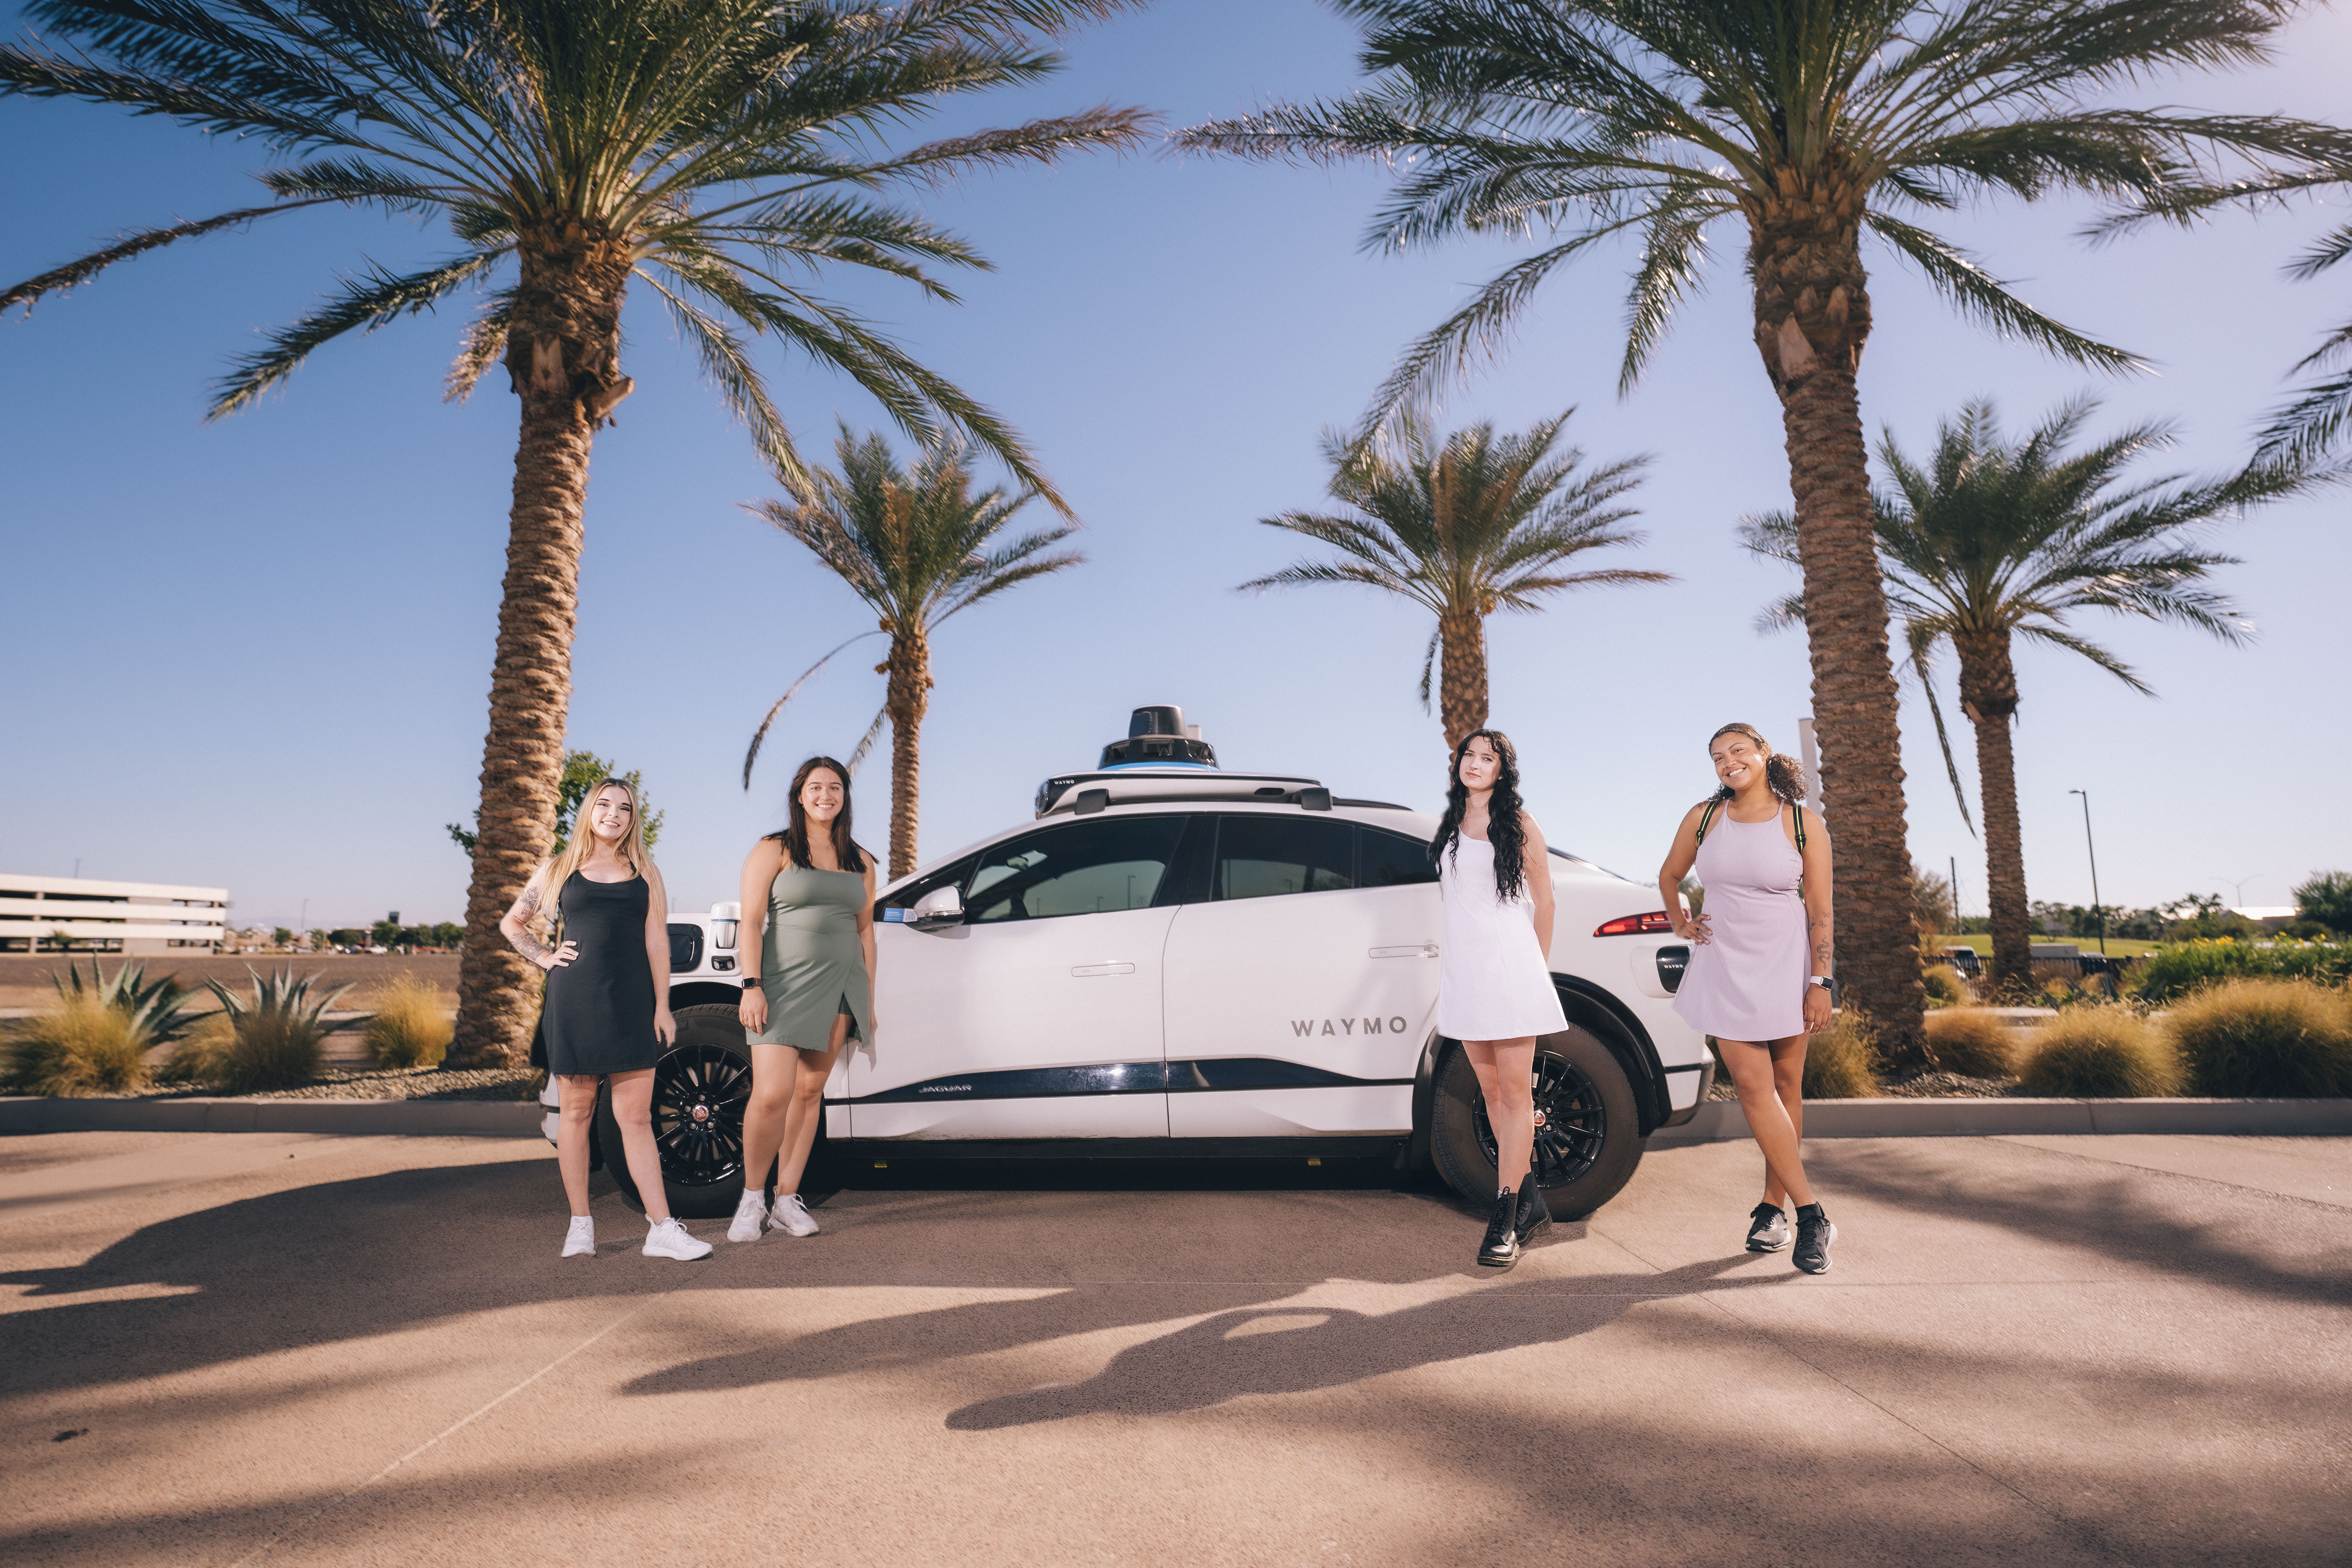 Co-founders Julie, Hope, Grace, and Deysia standing in front of a Waymo autonomous vehicle